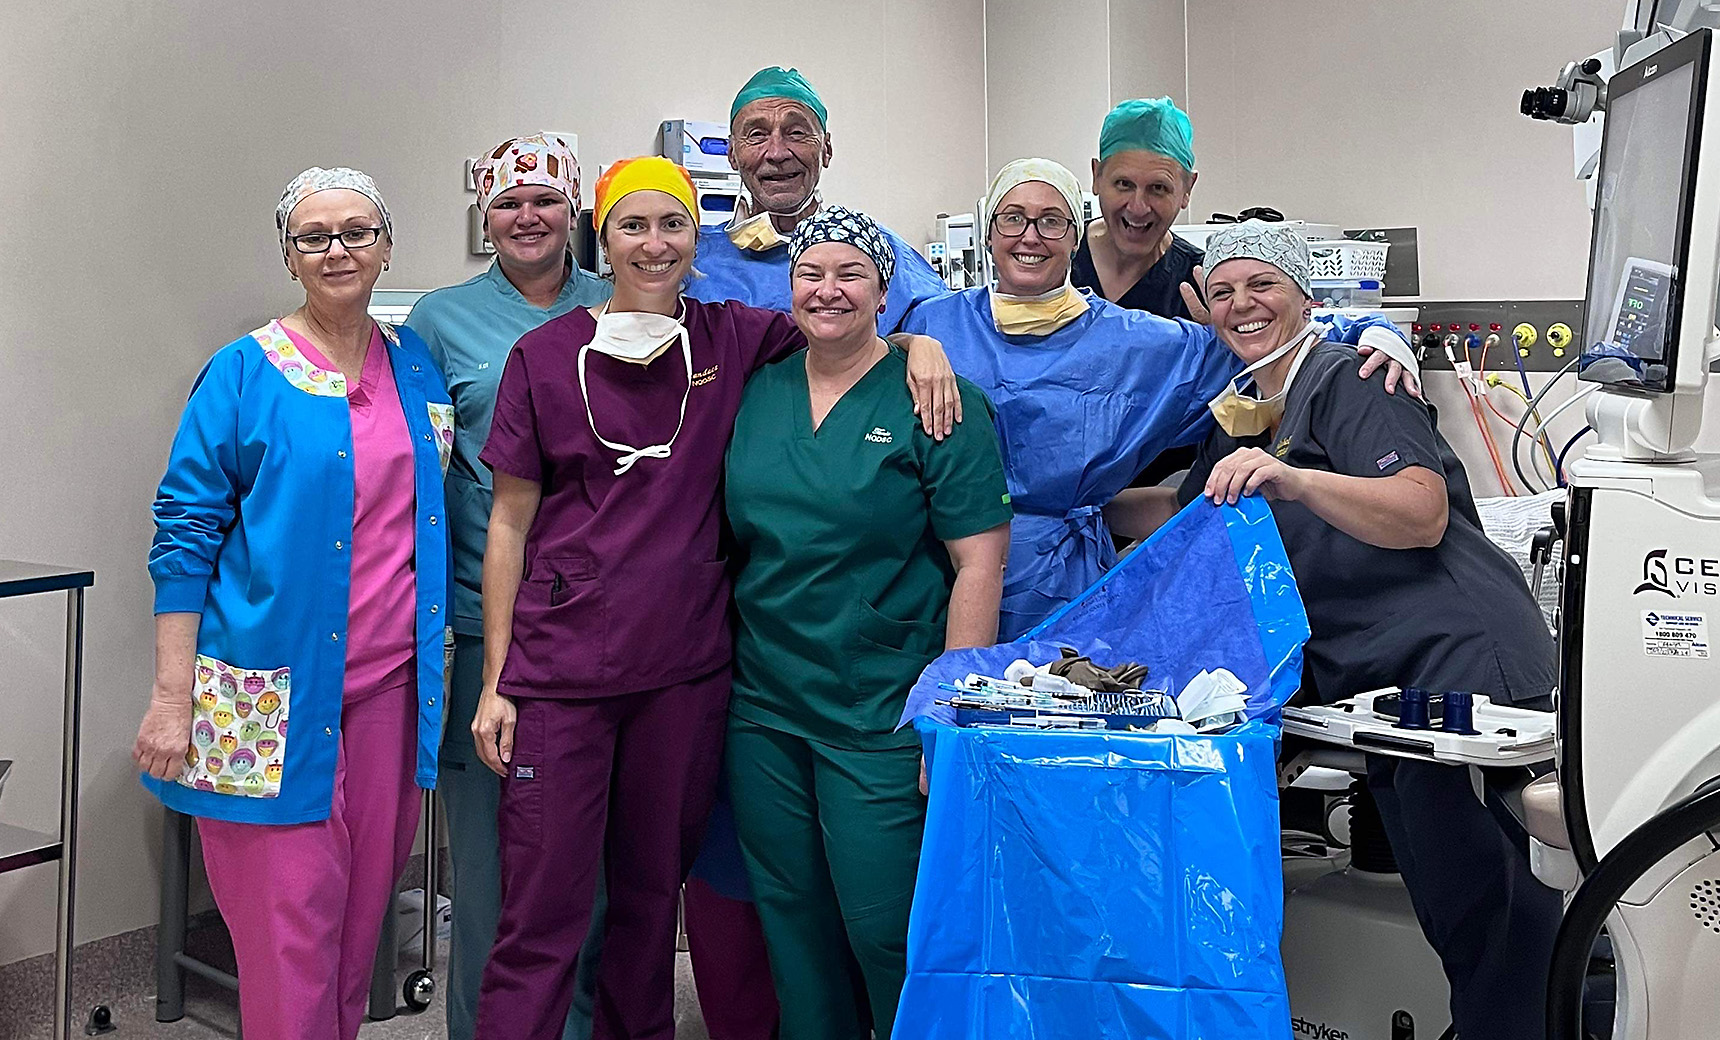 People in scrubs standing together in an operating theatre and smiling at the camera.